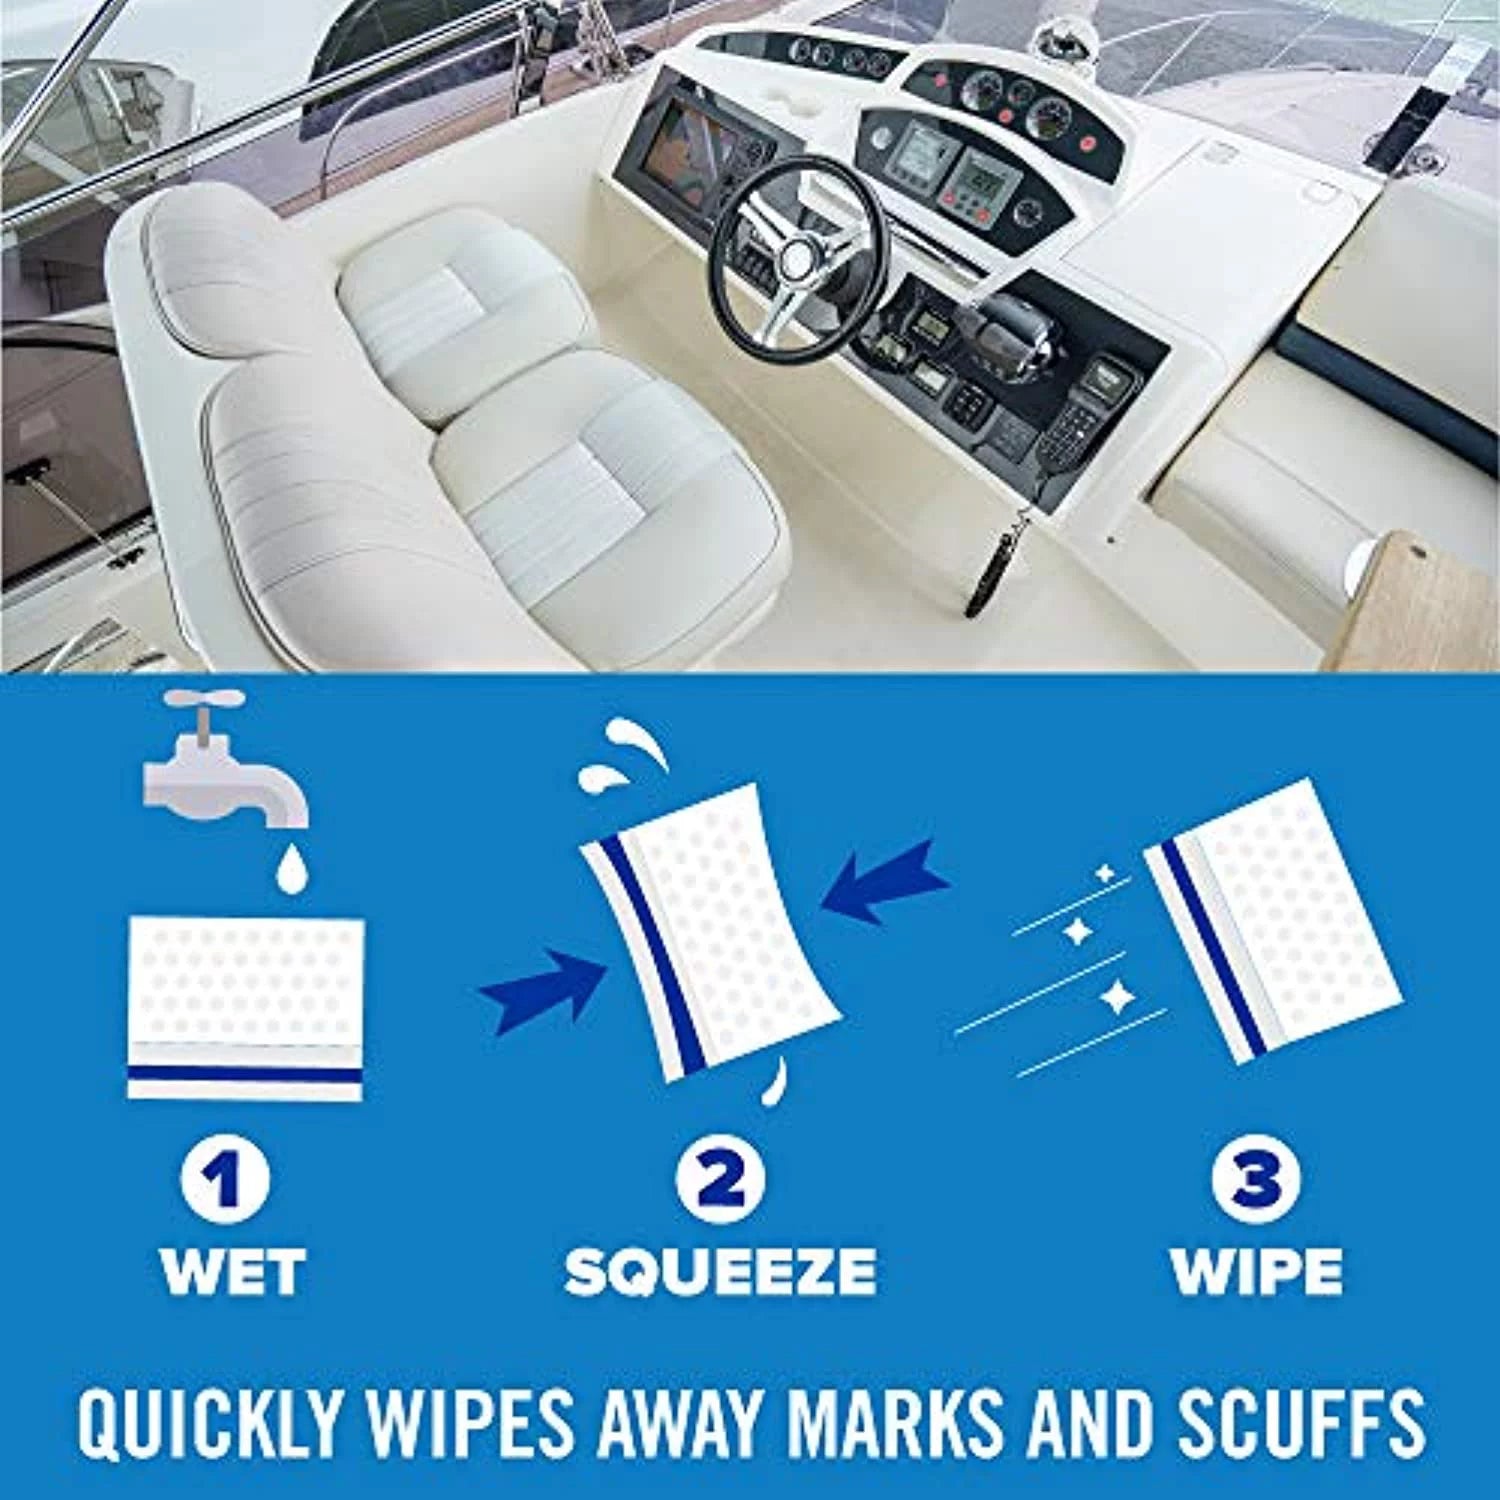 Premium Boat Scuff Erasers | Magic Eraser Boating Accessories for Cleaning Black Streak Deck Marks and More 9 Pack